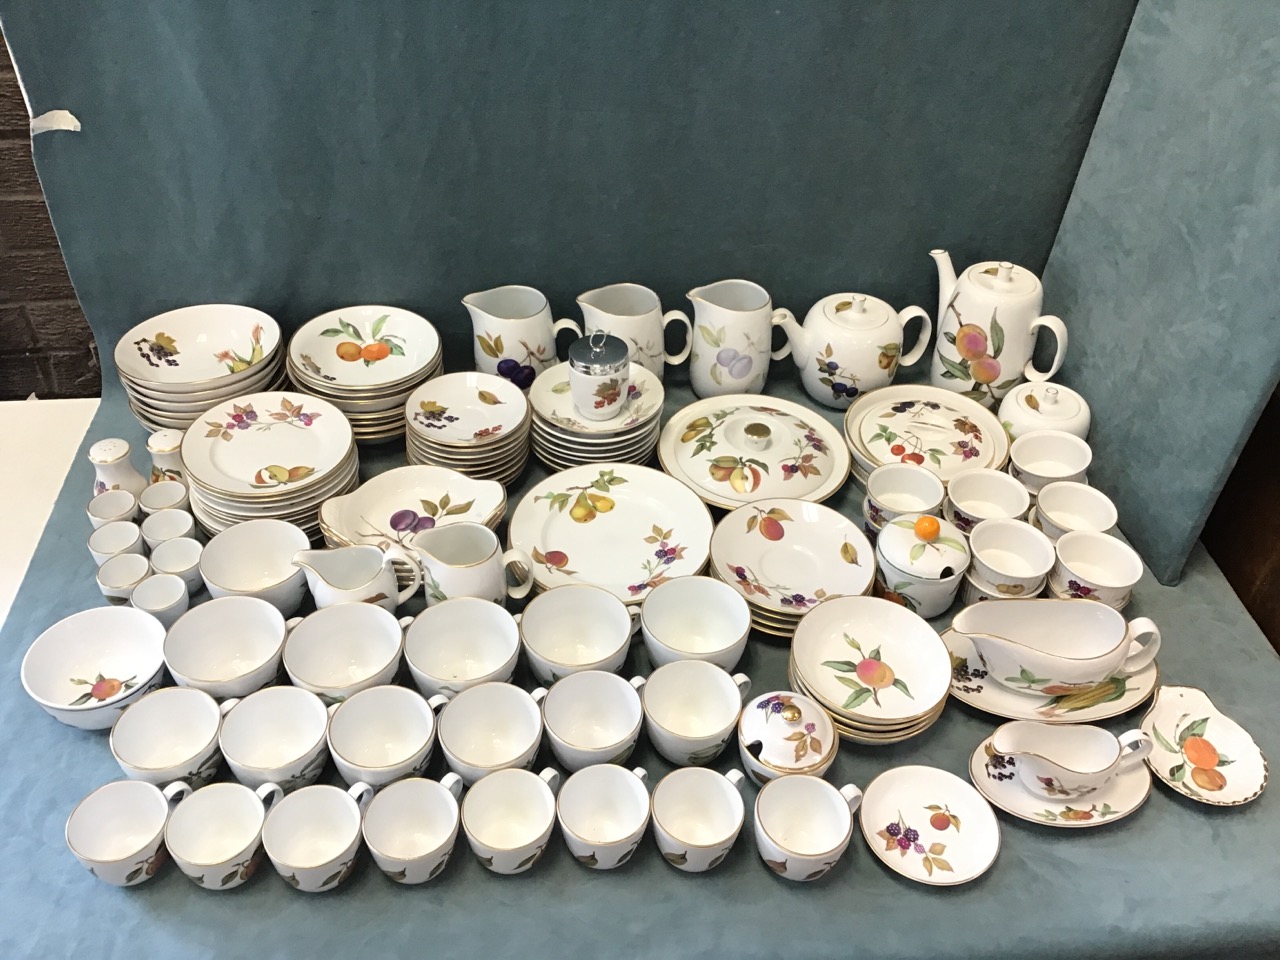 An extensive Royal Worcester service in the Evesham pattern - cups, saucers, teaplates, bowls,